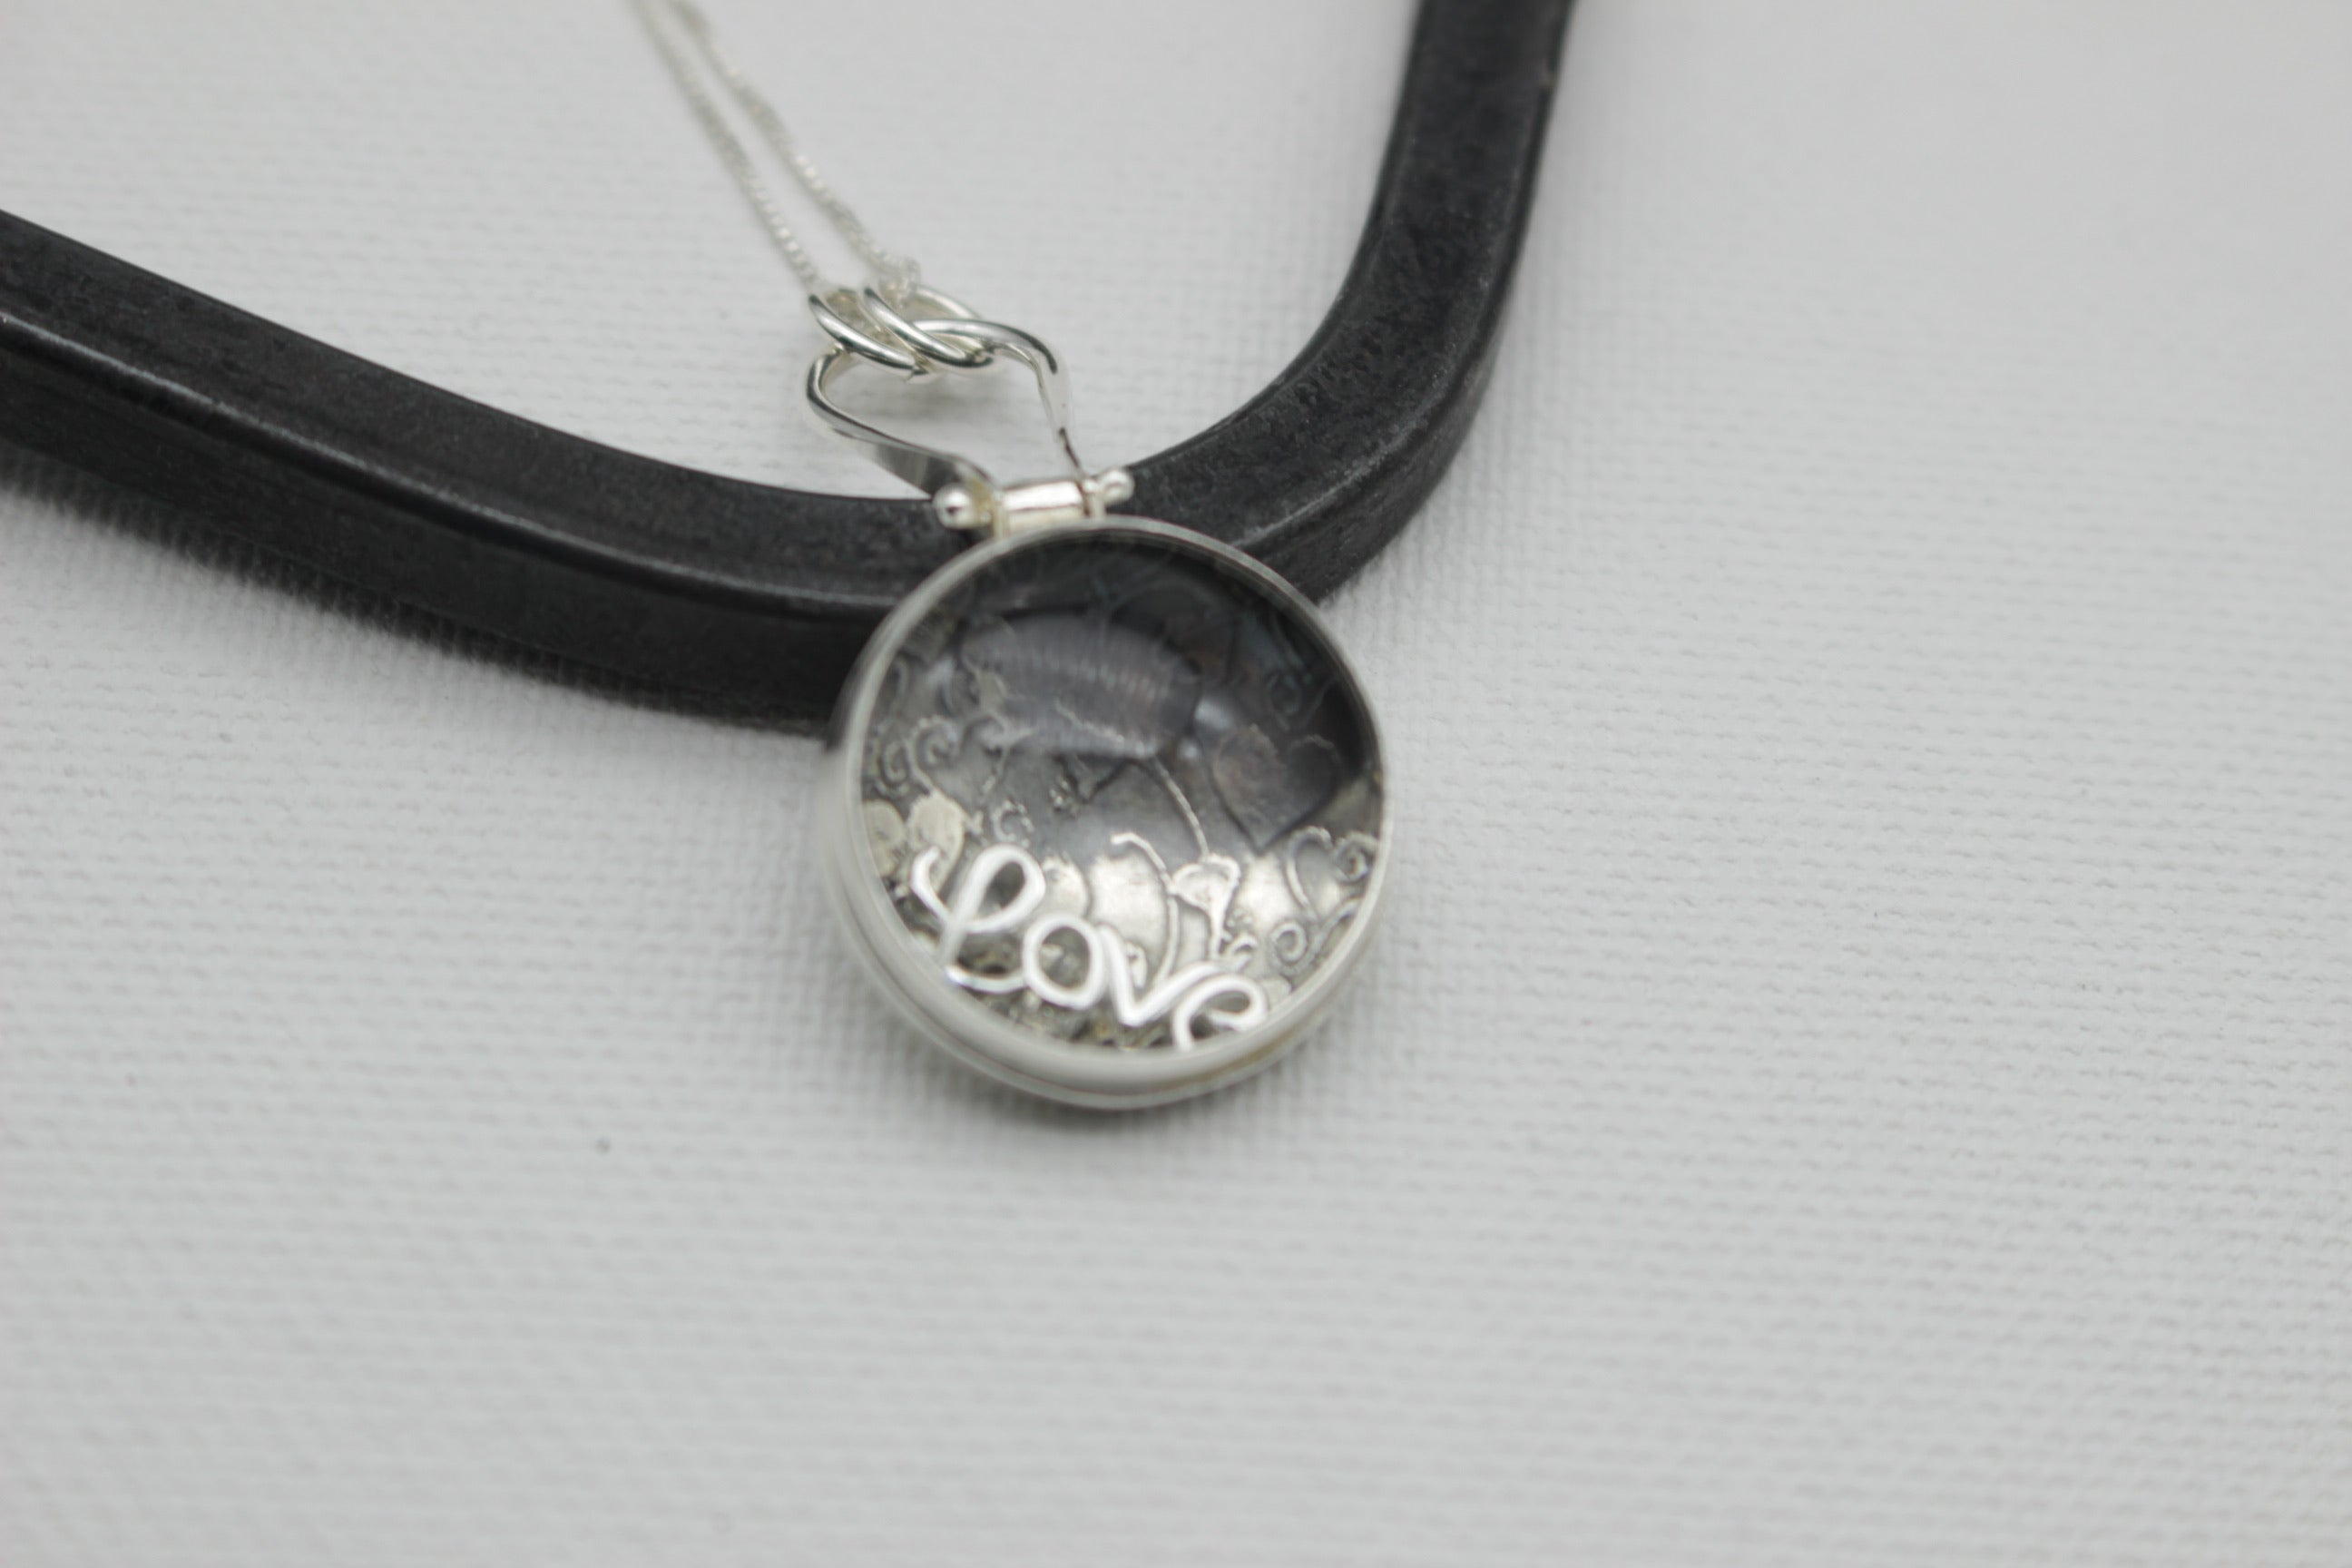 Floating Charm Love Necklace